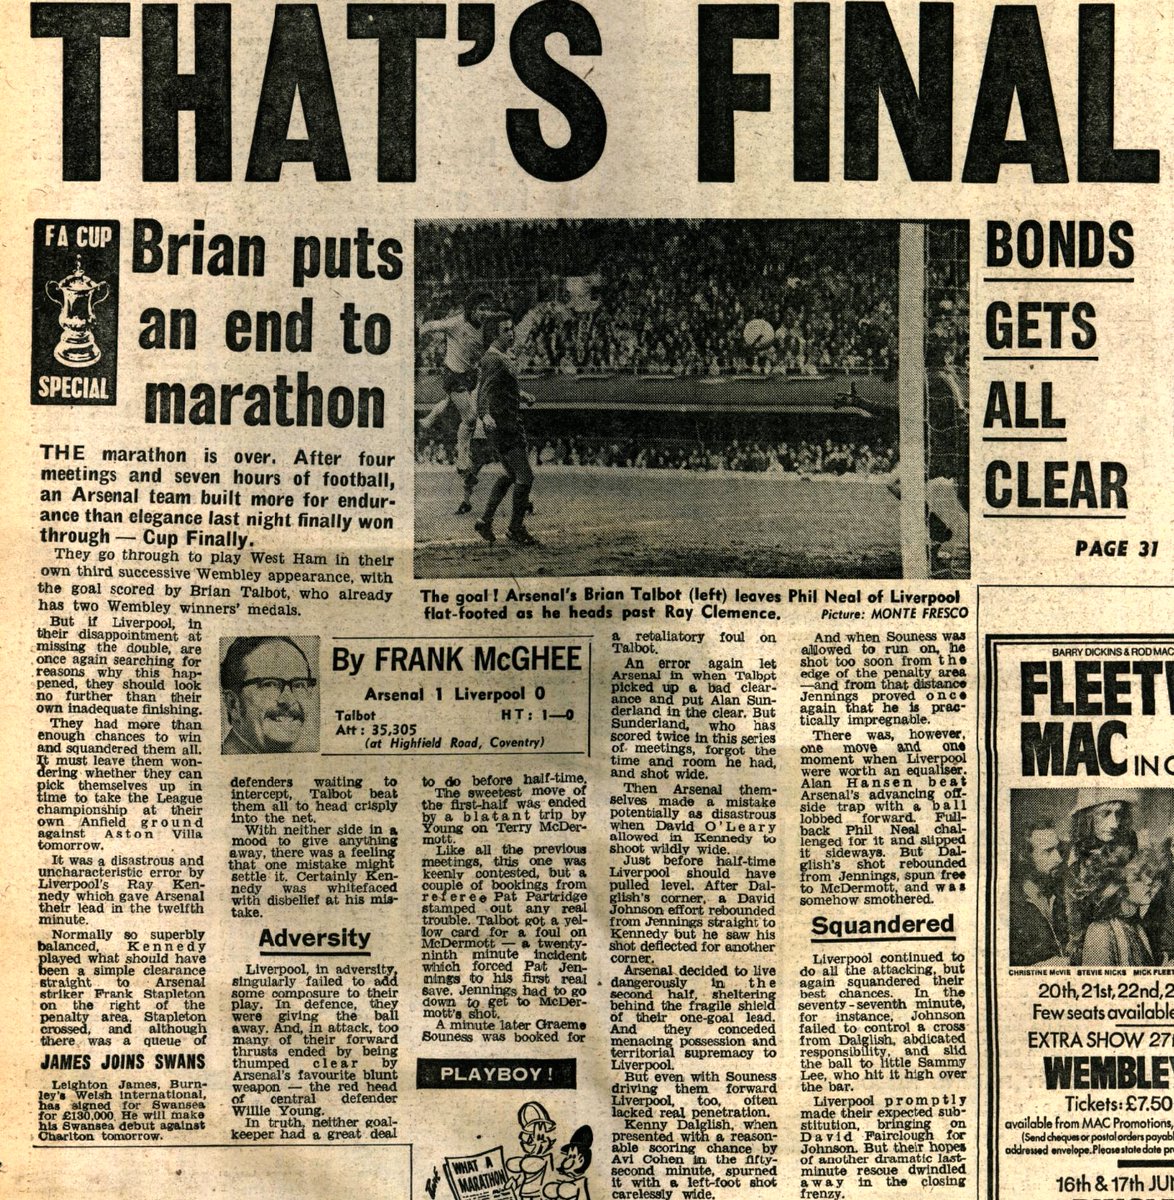 Finally! OTD 1980 a goal from Brian Talbot settled the FA Cup semi-final drama between The #Arsenal and Liverpool at Highfield Road. Three replays were needed and in the end the Gunners secured their place for the Wembley final for the third successive time.